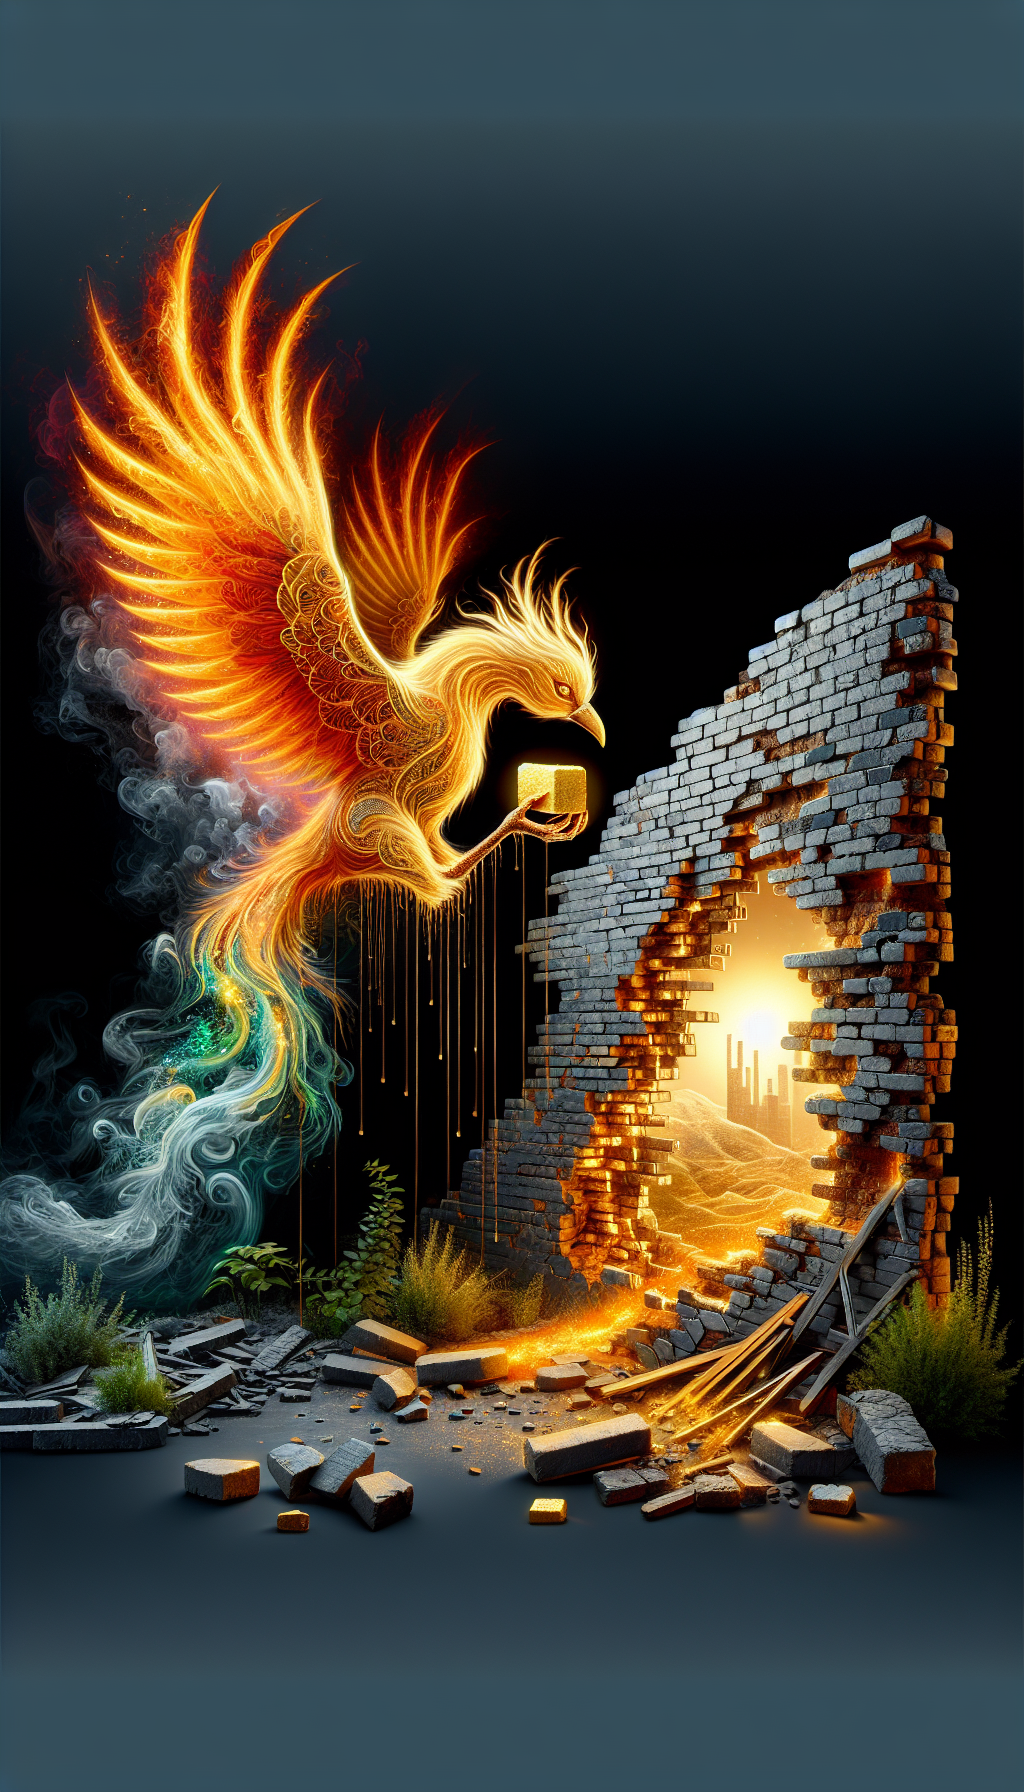 A stylized phoenix rises from a crumbling brick wall, grasping a golden brick in its talons, symbolizing rebirth and value. The wall's scattered antique bricks shimmer with precious metal veins, hinting at a lucrative market. Flora winds through the ruins, merging the past's decay with the thriving future, while price tags dangle from select, aged bricks, showcasing their unexpected worth.